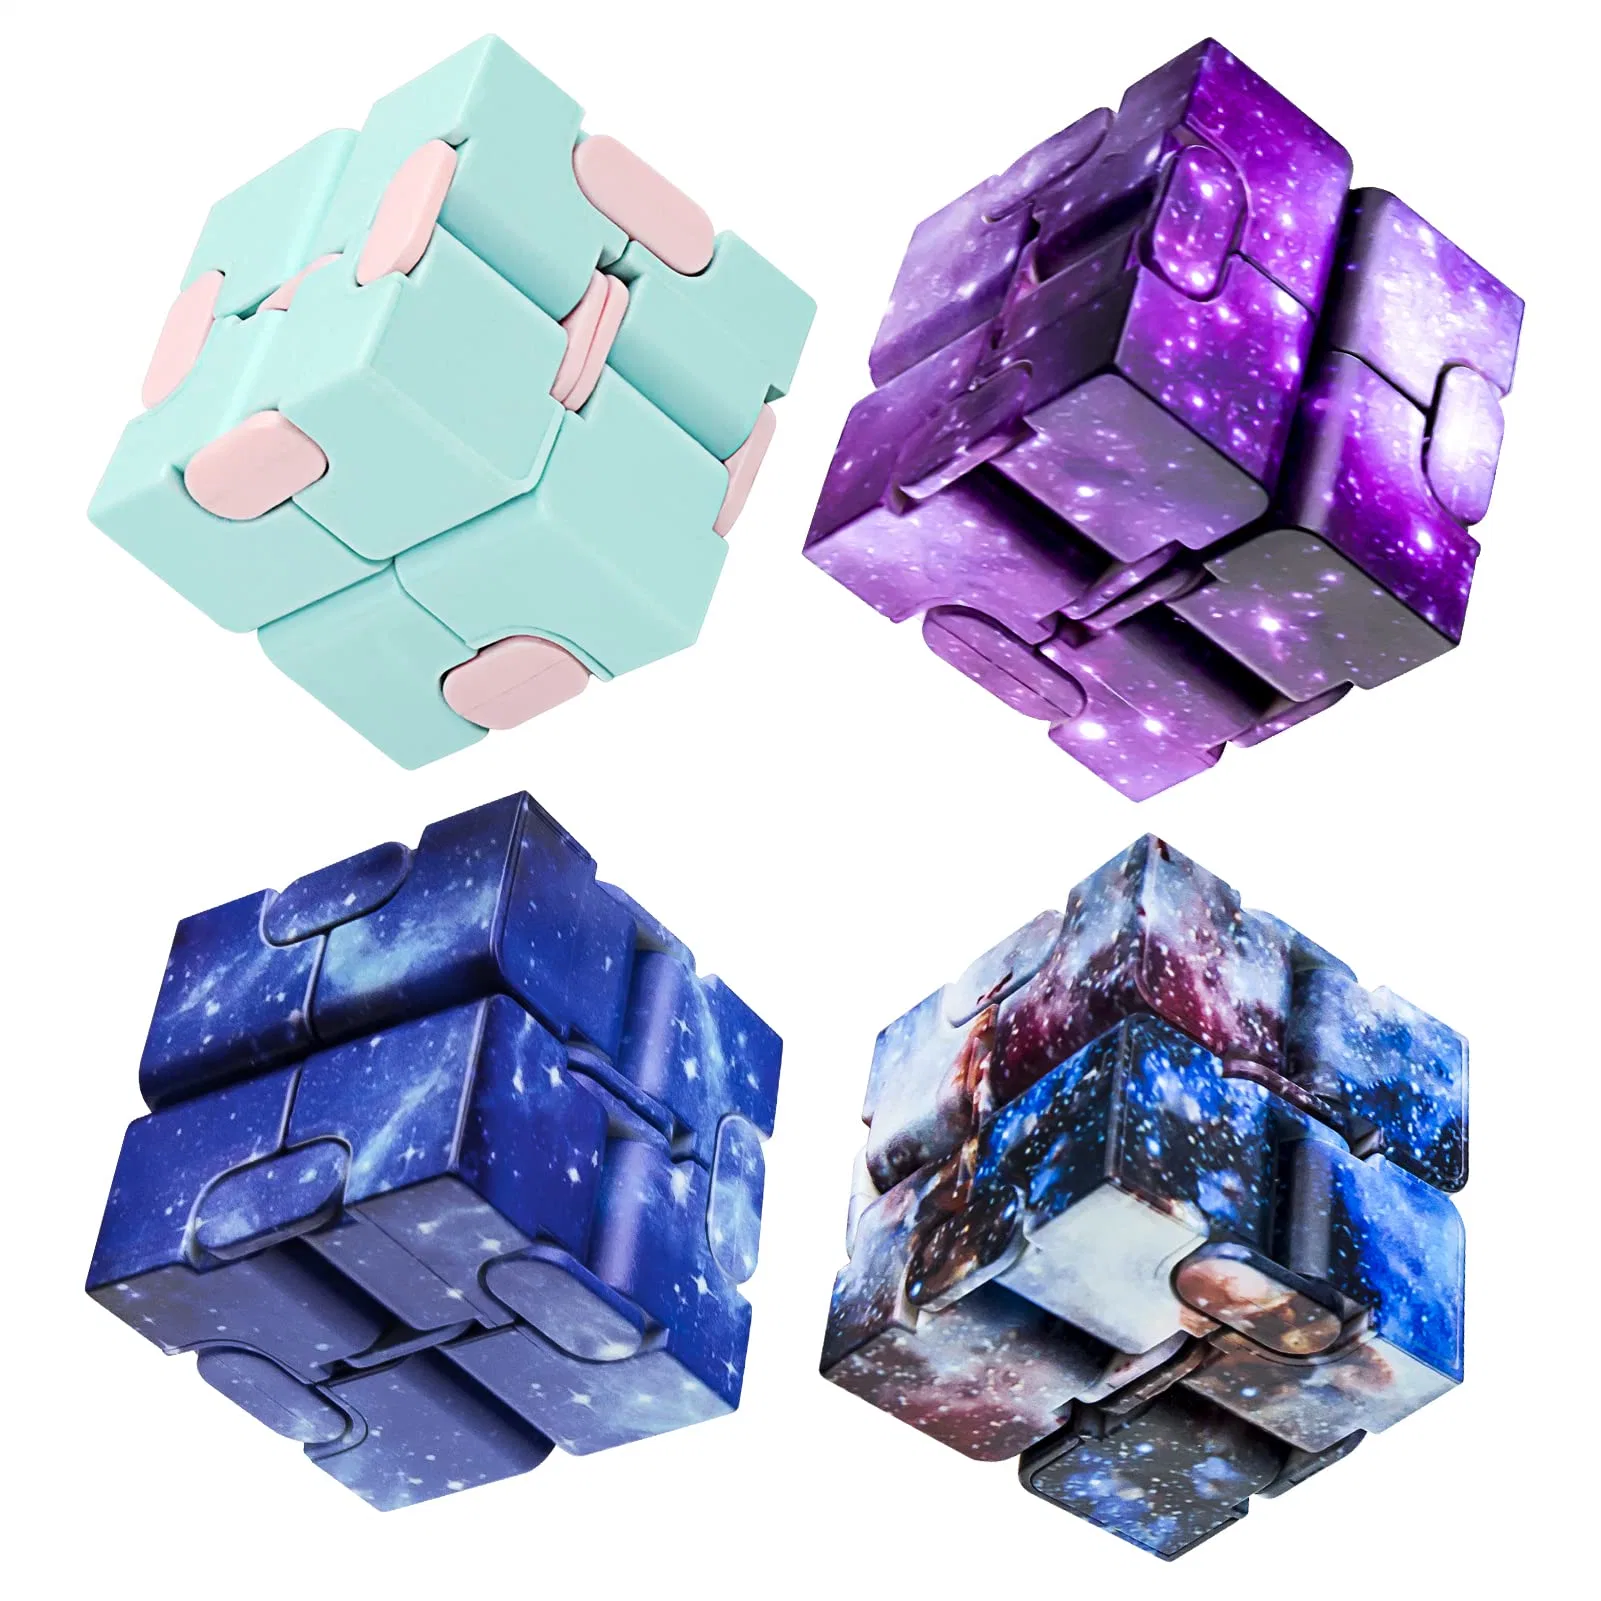 Infinity Cube Fidget Toy Stress Anxiety Relief Mini Hand Held Galaxy Space Fidget Cube Toy for Adults and Kids with Add Adhd Killing Time Starry Color Infinity